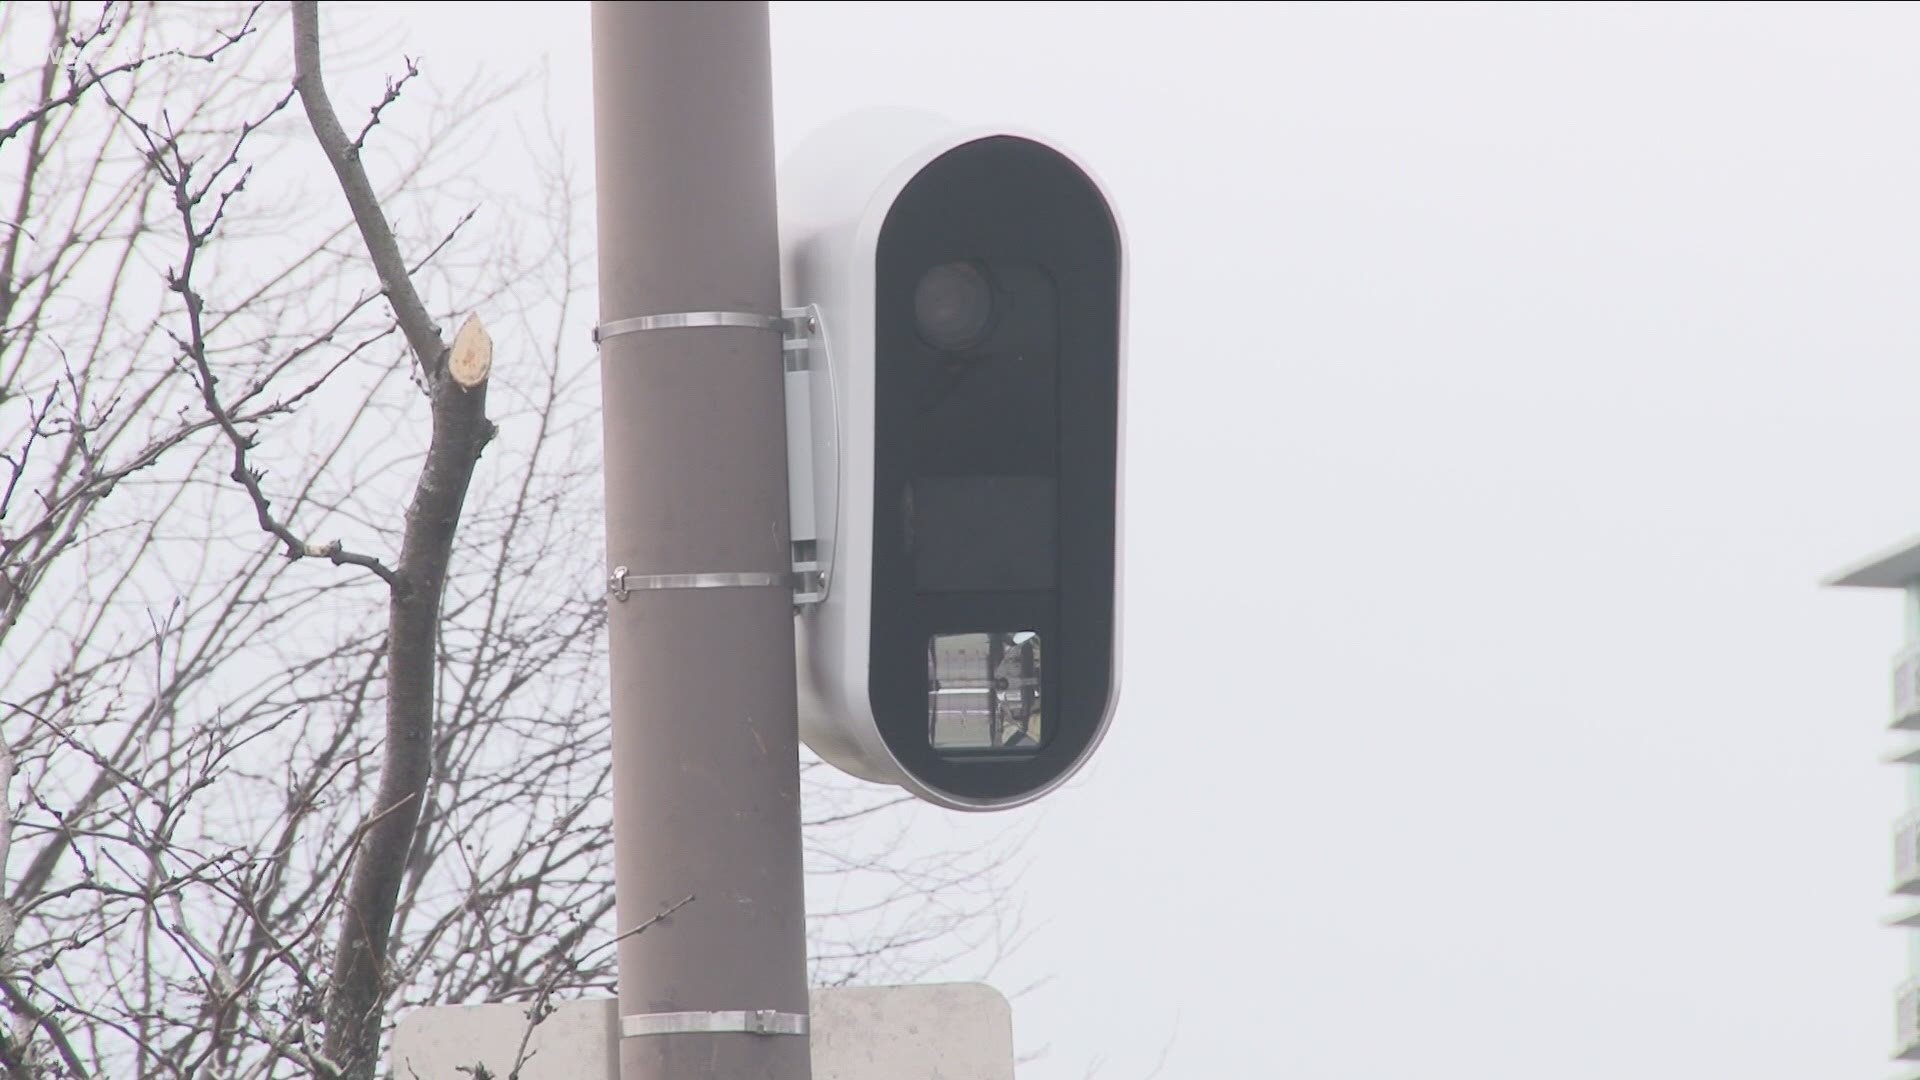 As of Monday, some Buffalo Public School students are going to be returning to in-person learning,
which means all school speed zone cameras will be turning back on.